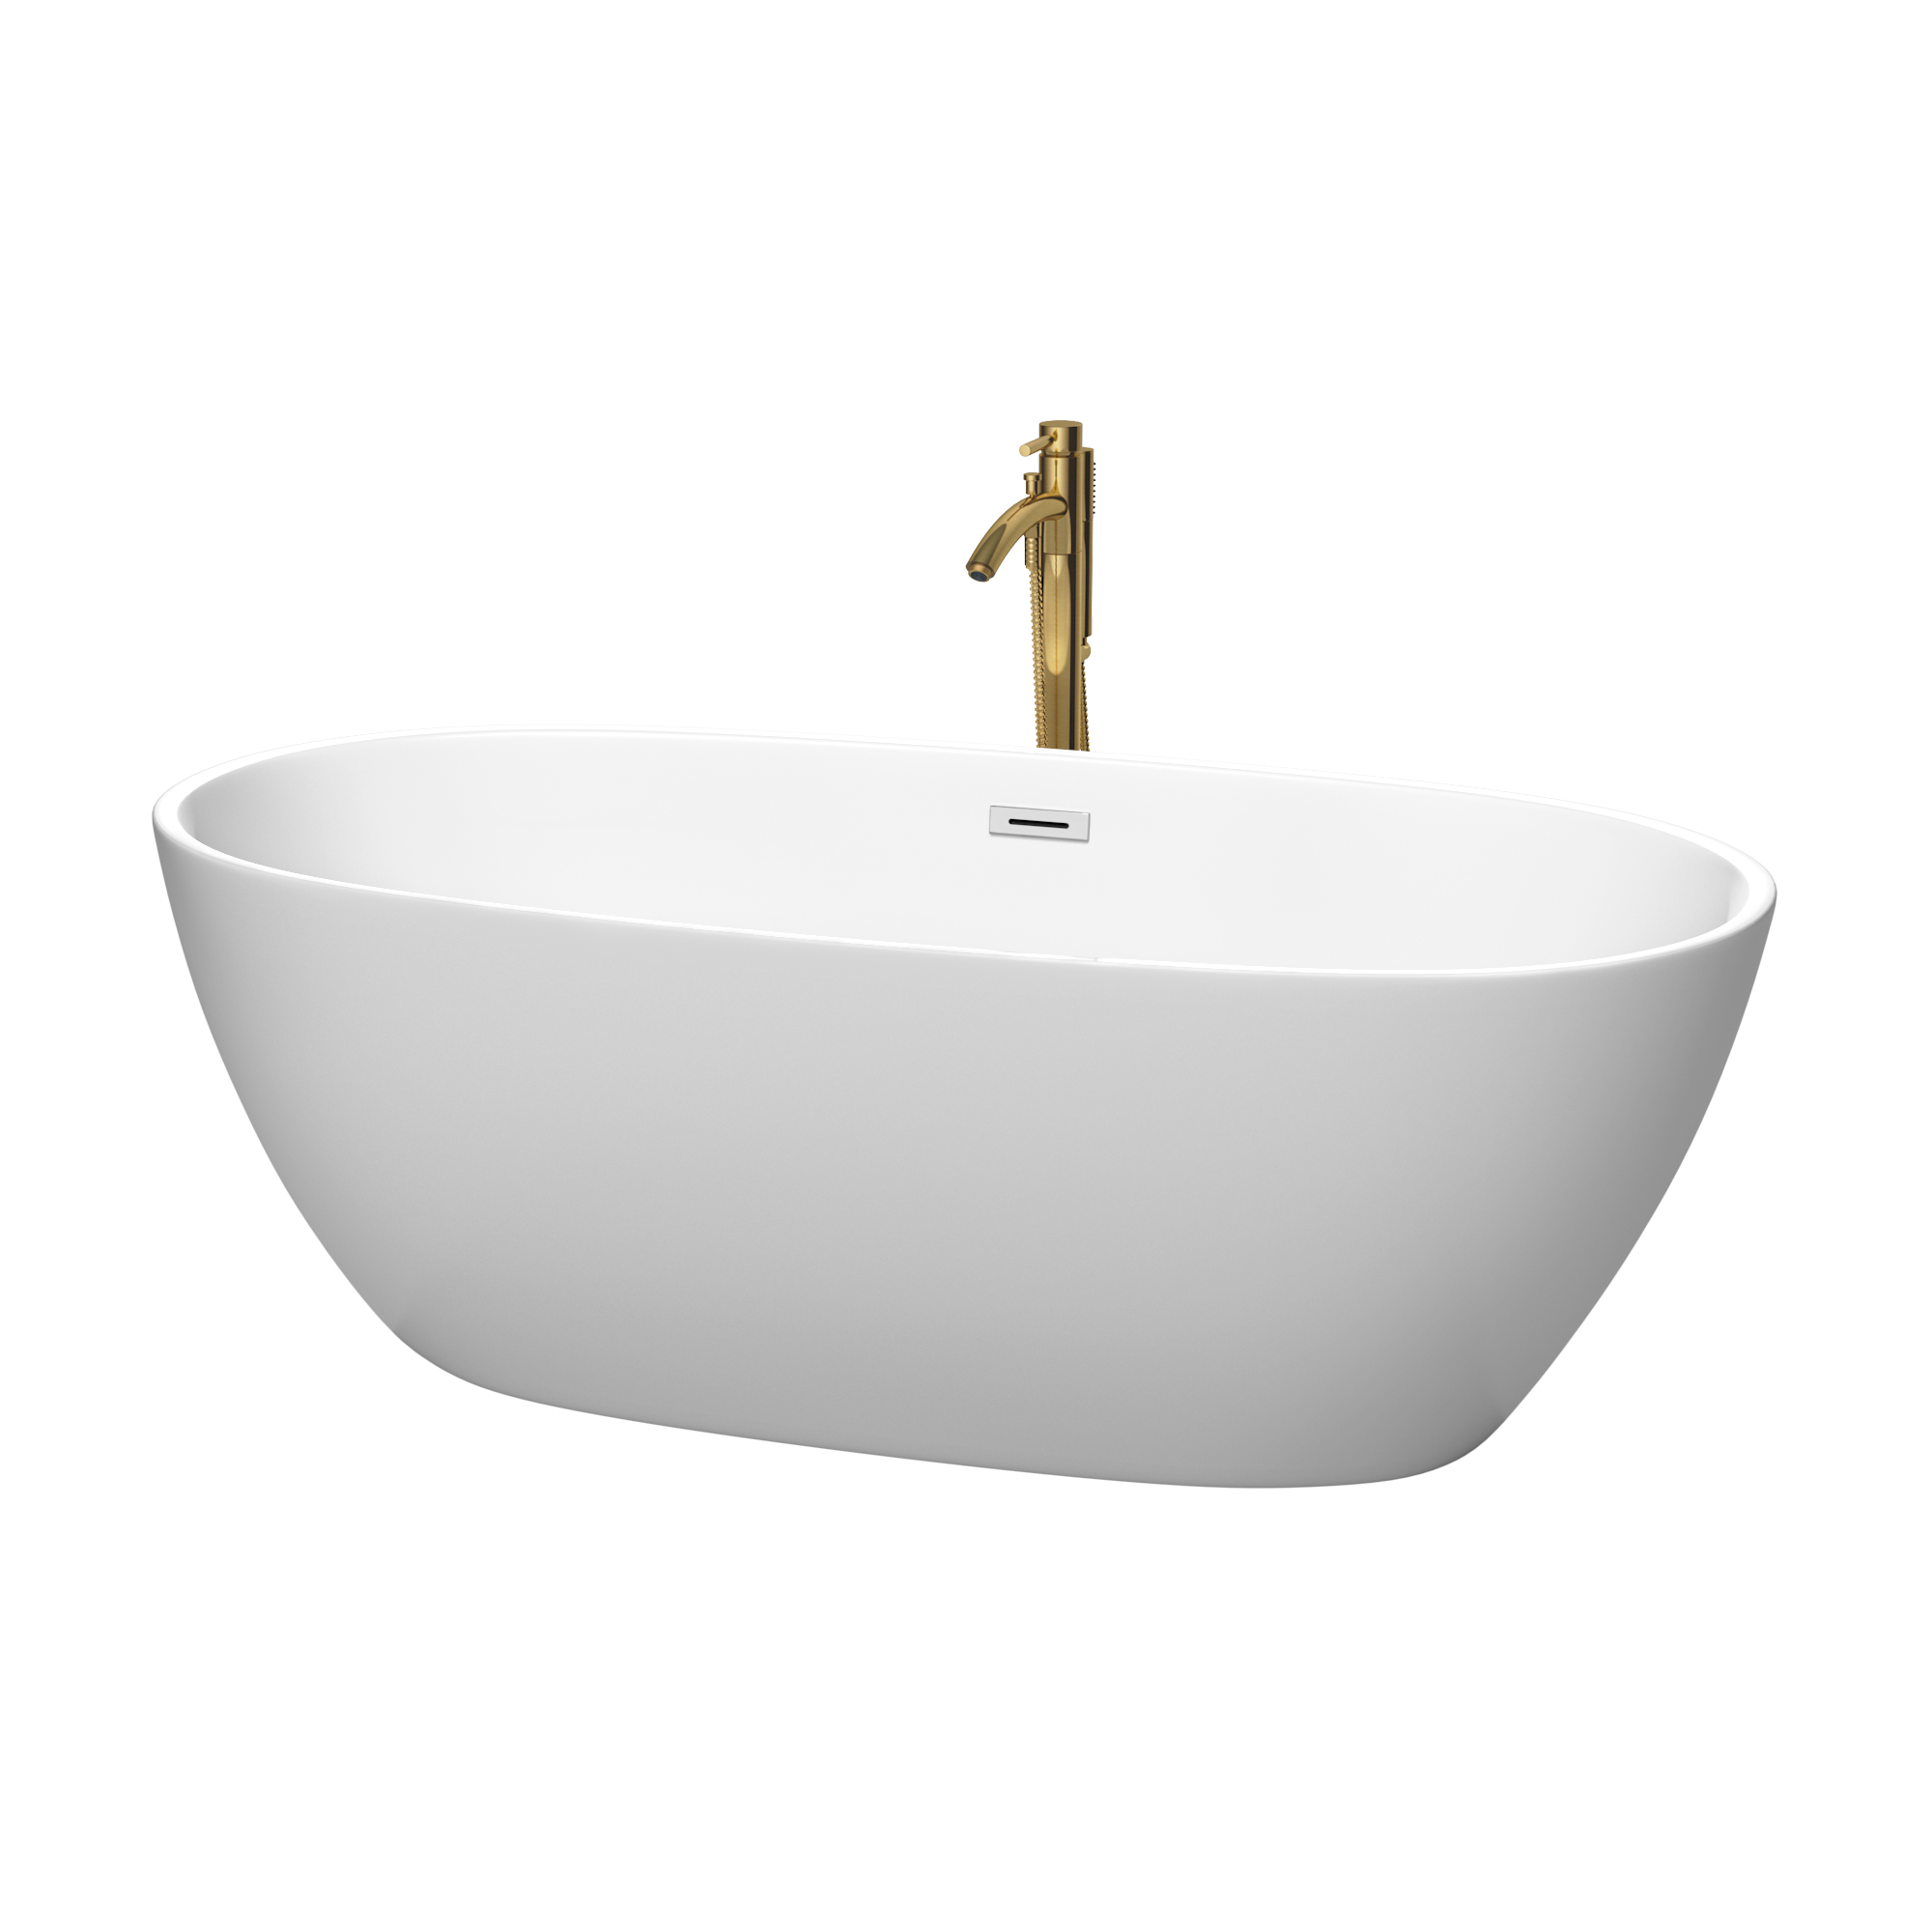 67" Freestanding Bathtub in Matte White with Polished Chrome Trim and Floor Mounted Faucet in Brushed Gold